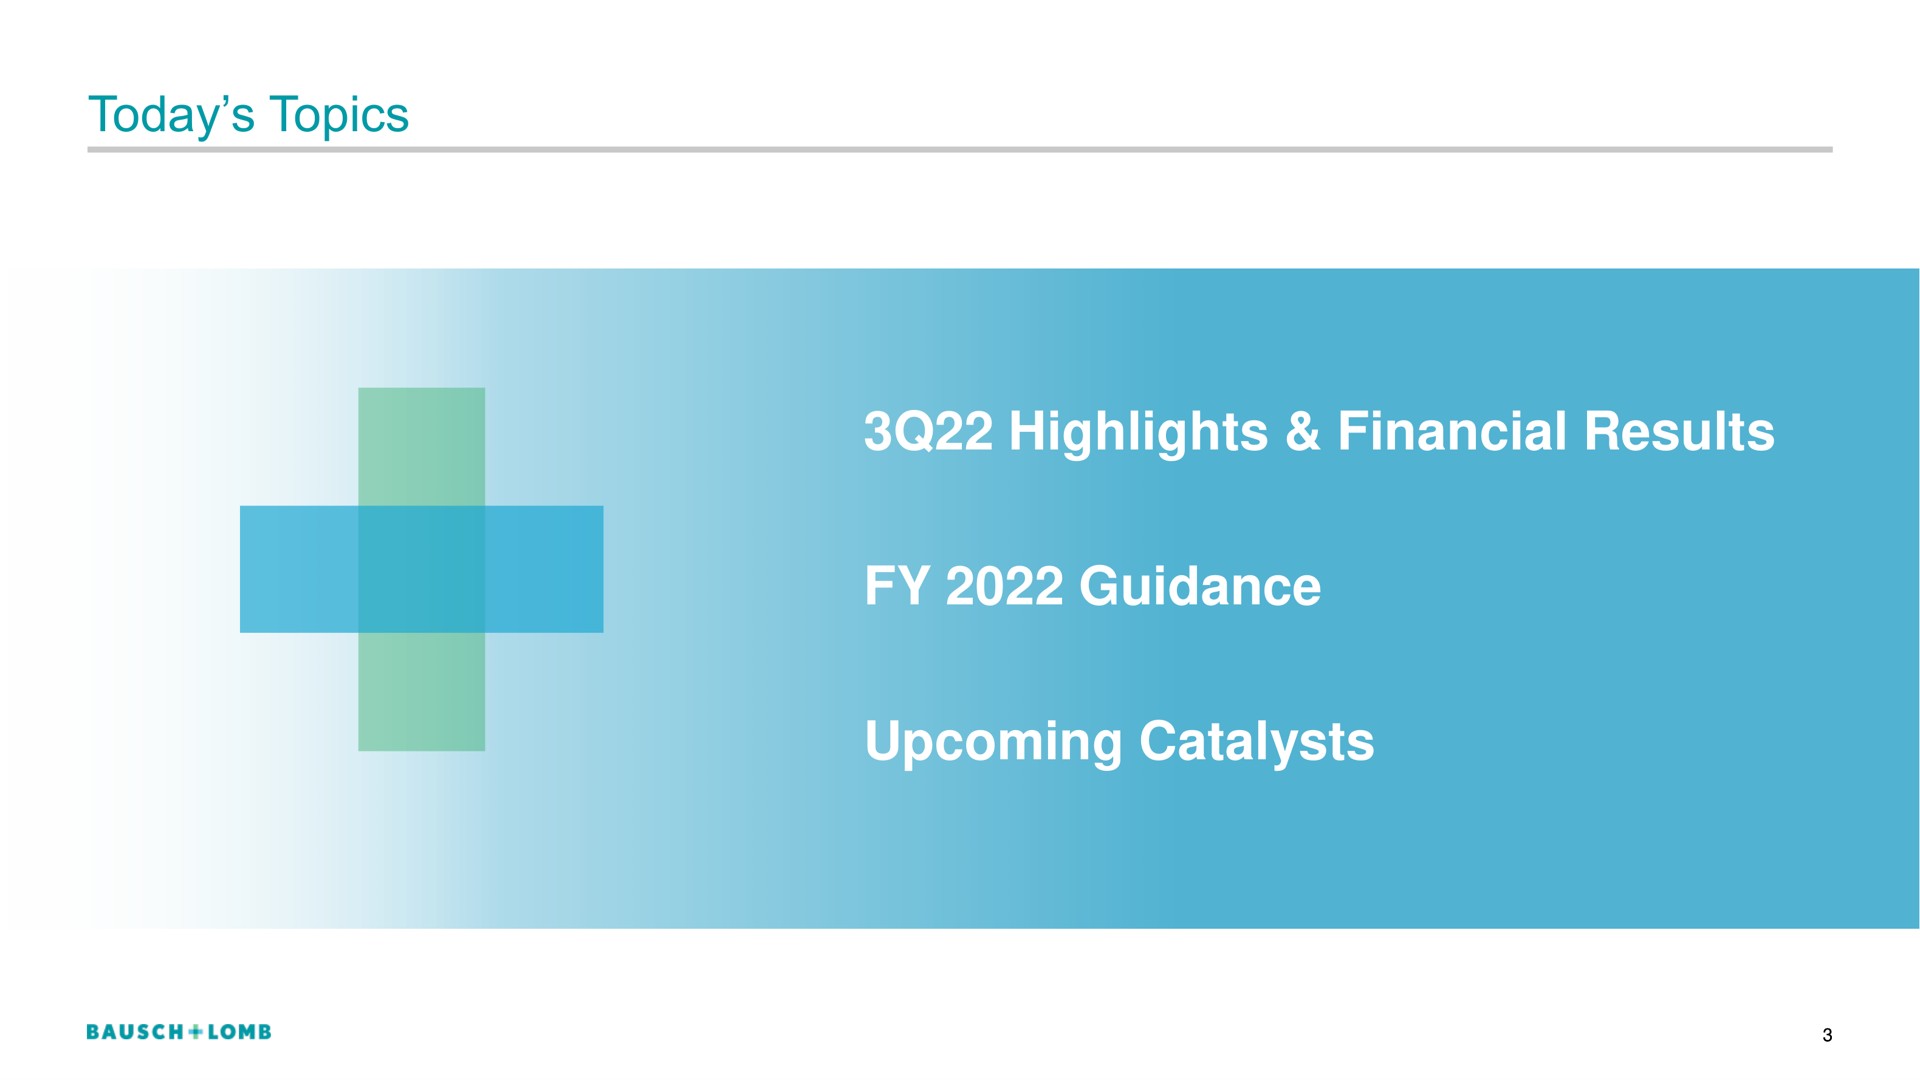 today topics highlights financial results guidance upcoming catalysts | Bausch+Lomb